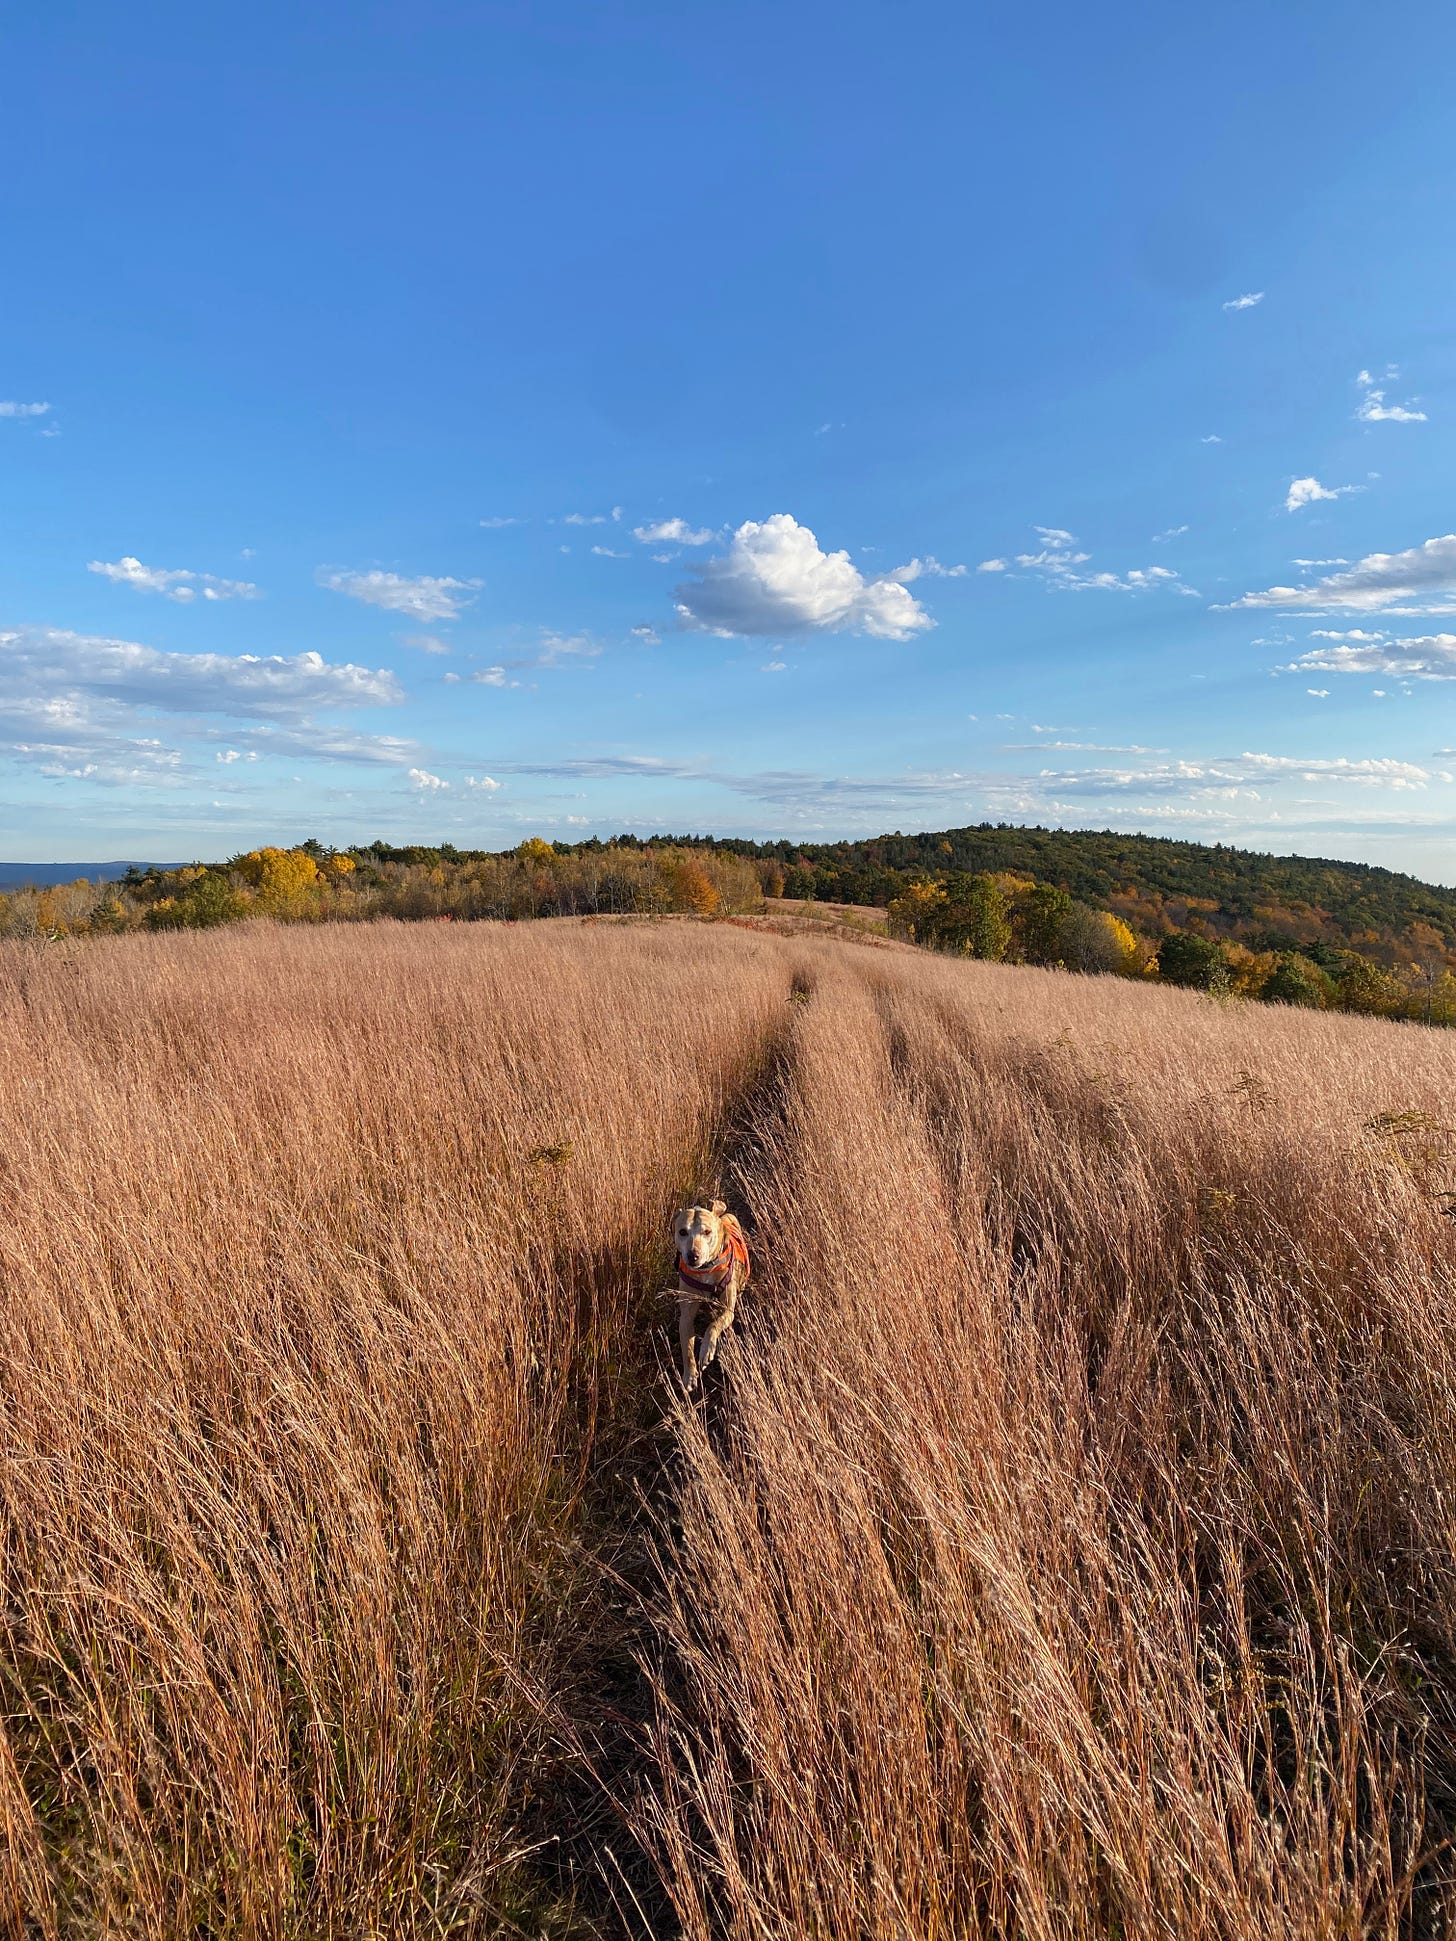 My dog Nessa is running through a field of tall brown grass that stretches a long way into the distance along a ridgetop. The sky is deep blue and the light is October crisp.